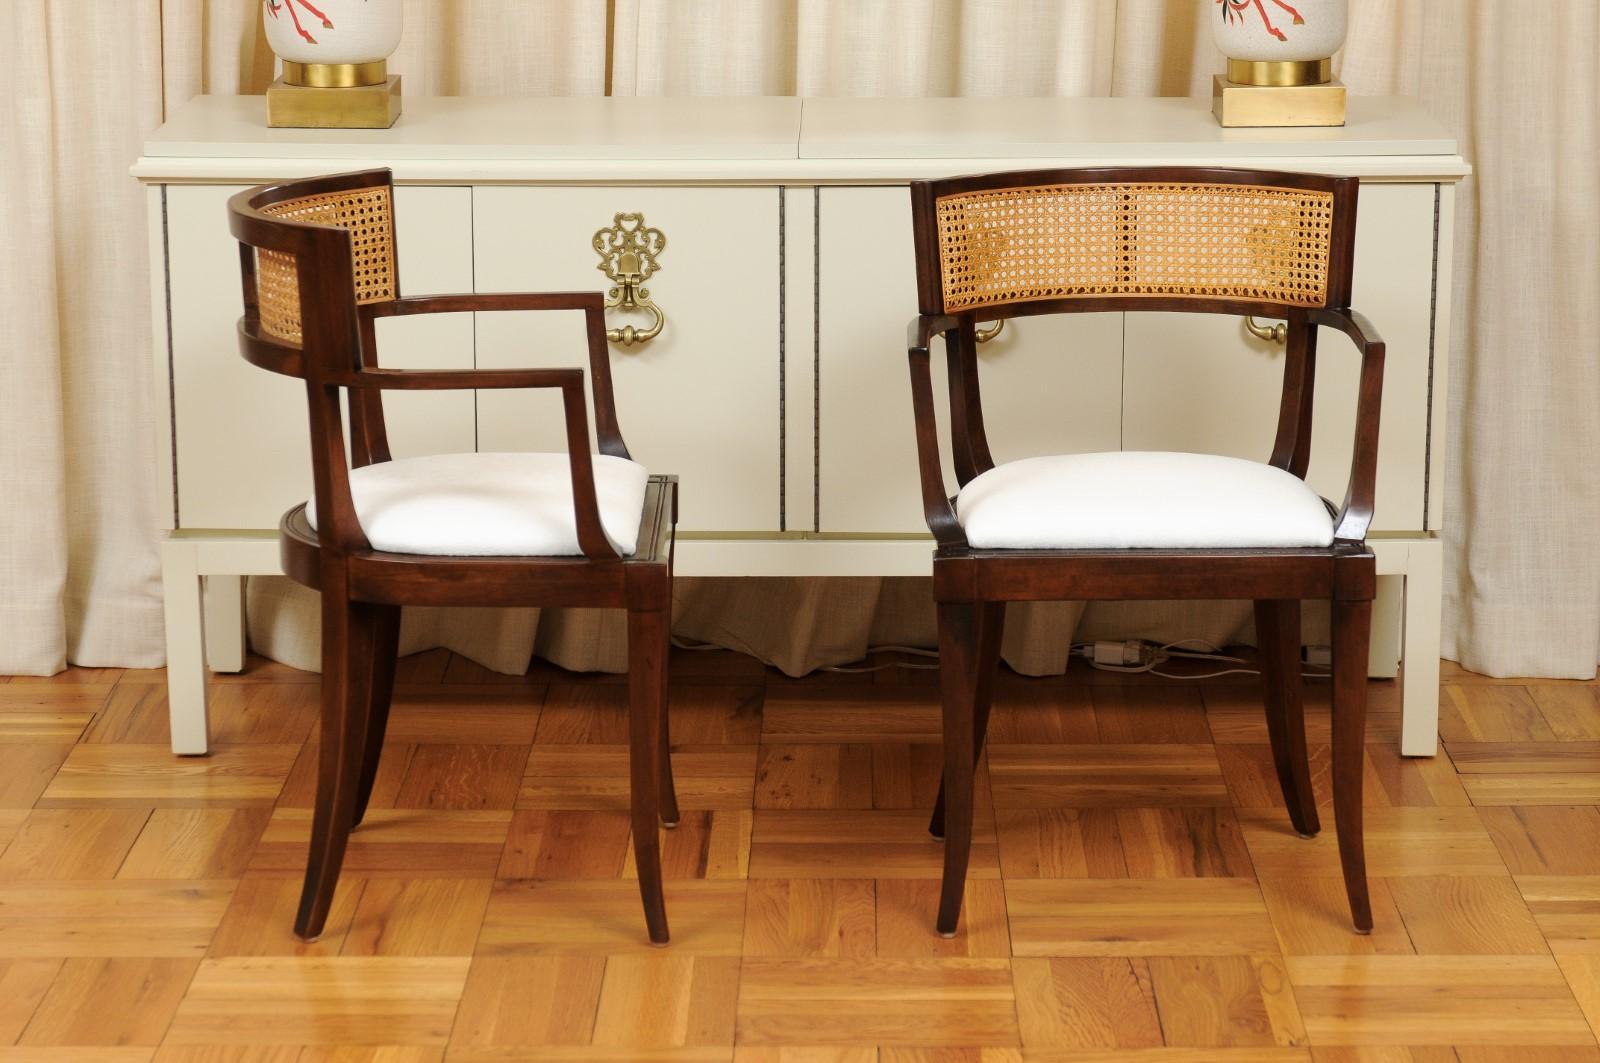 Organic Modern All Arms, Exquisite Set of 14 Klismos Cane Dining Chairs by Baker, circa 1958 For Sale